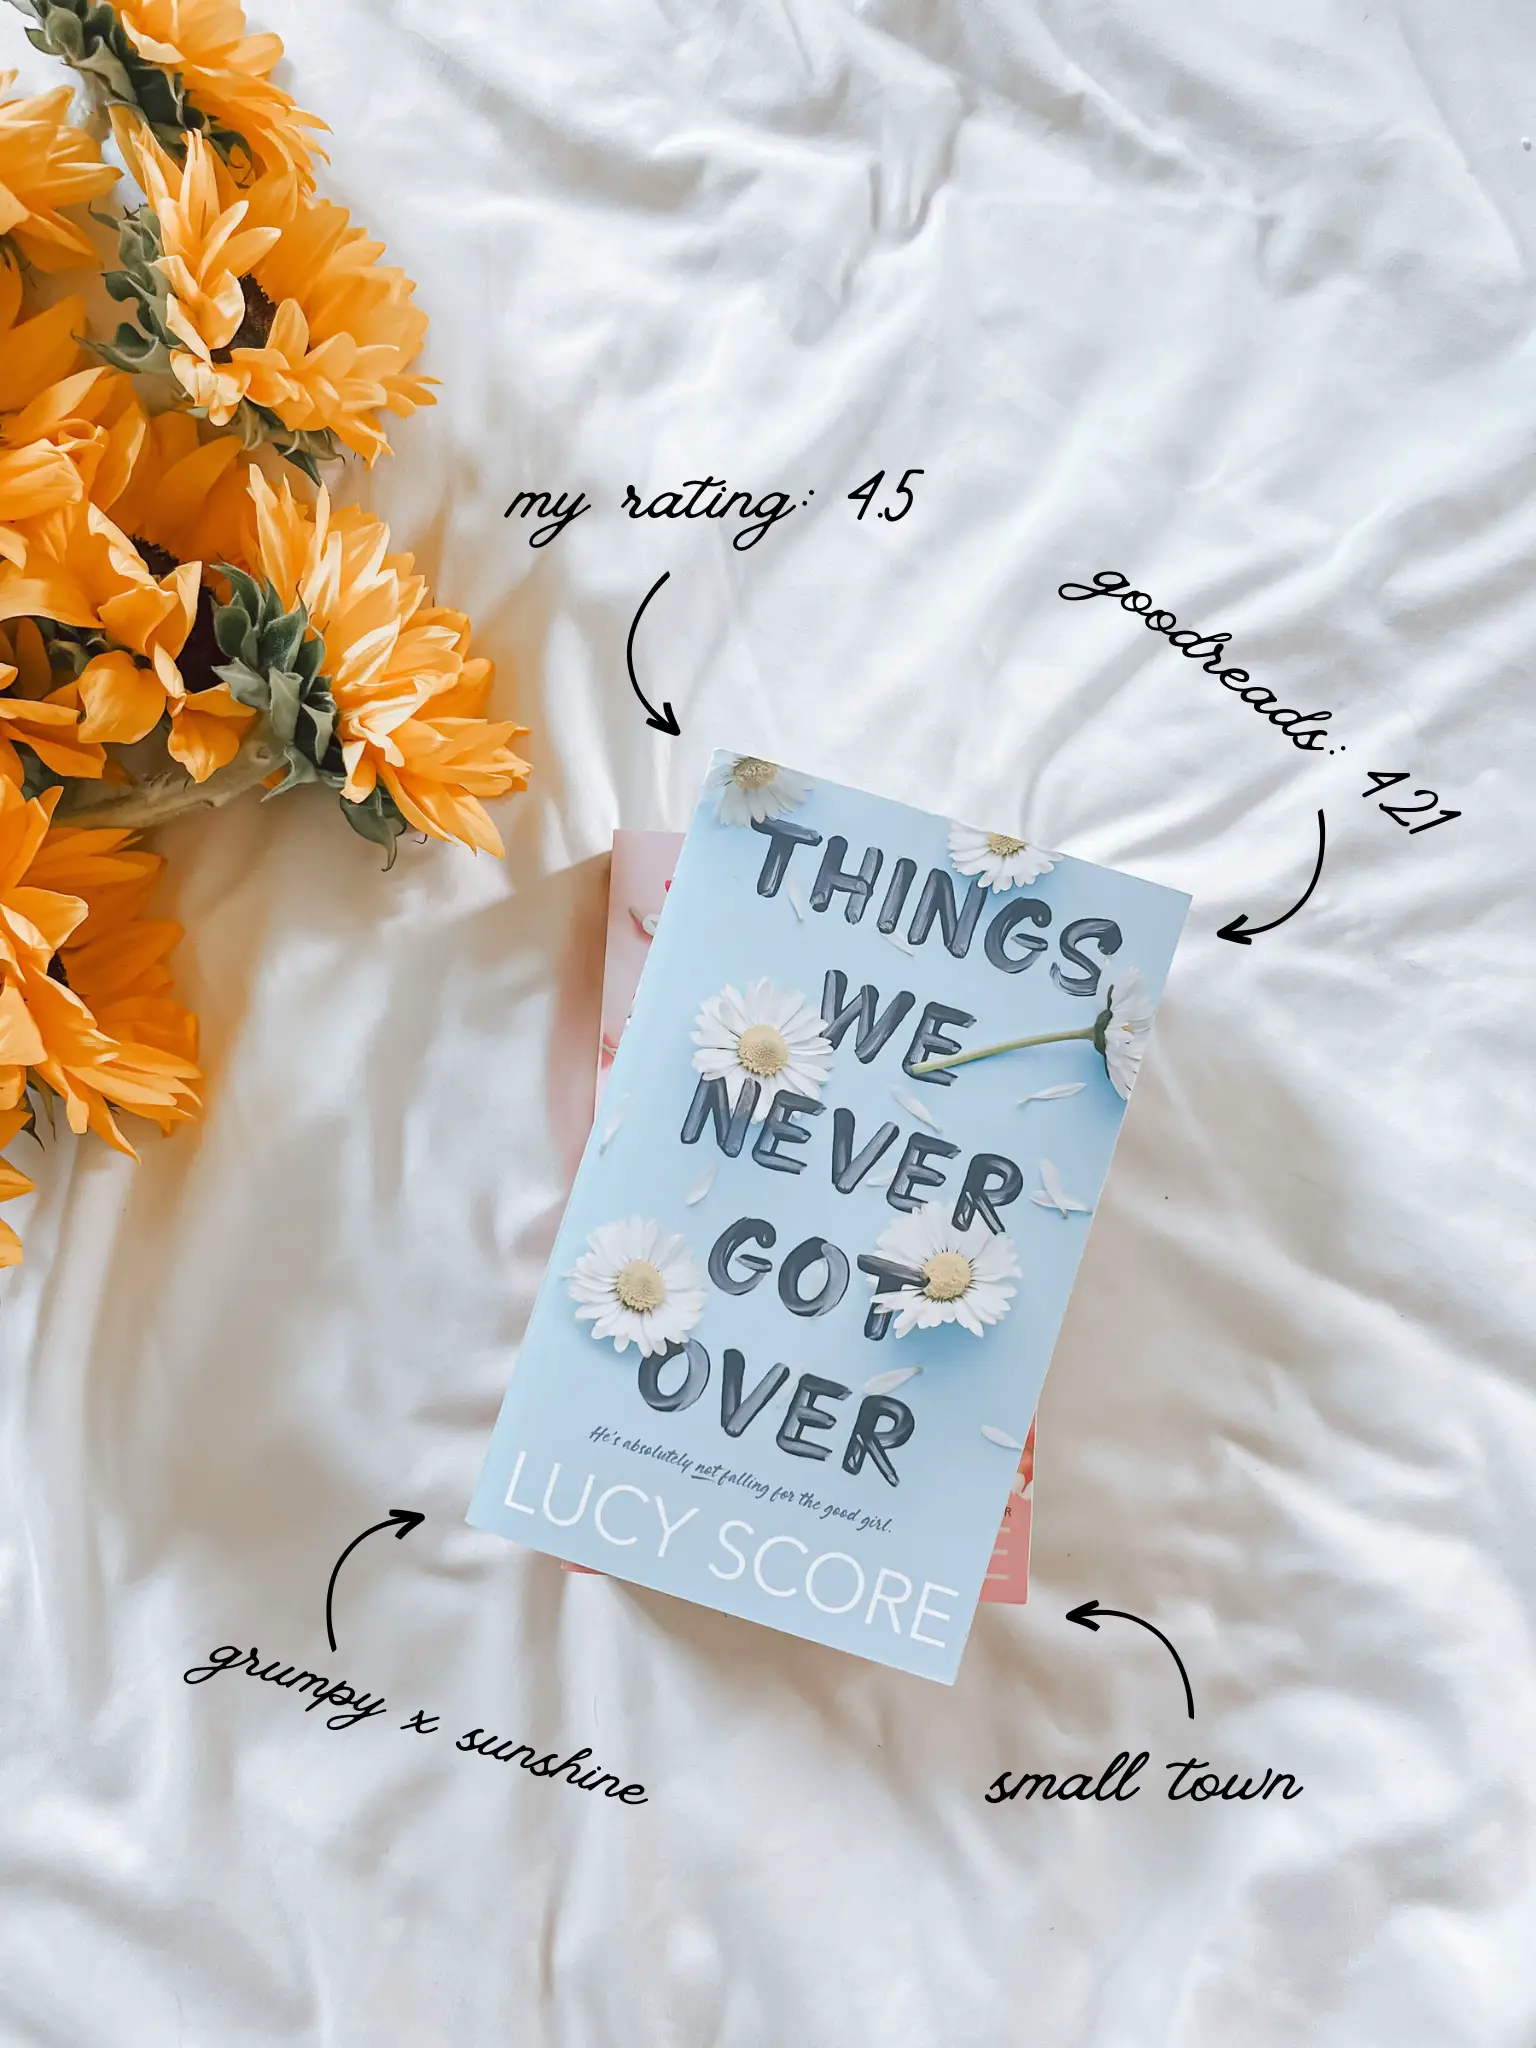 10 Books Like Things We Never Got Over by Lucy Score (Small-Town Grumpy  Sunshine) - What to Read Next